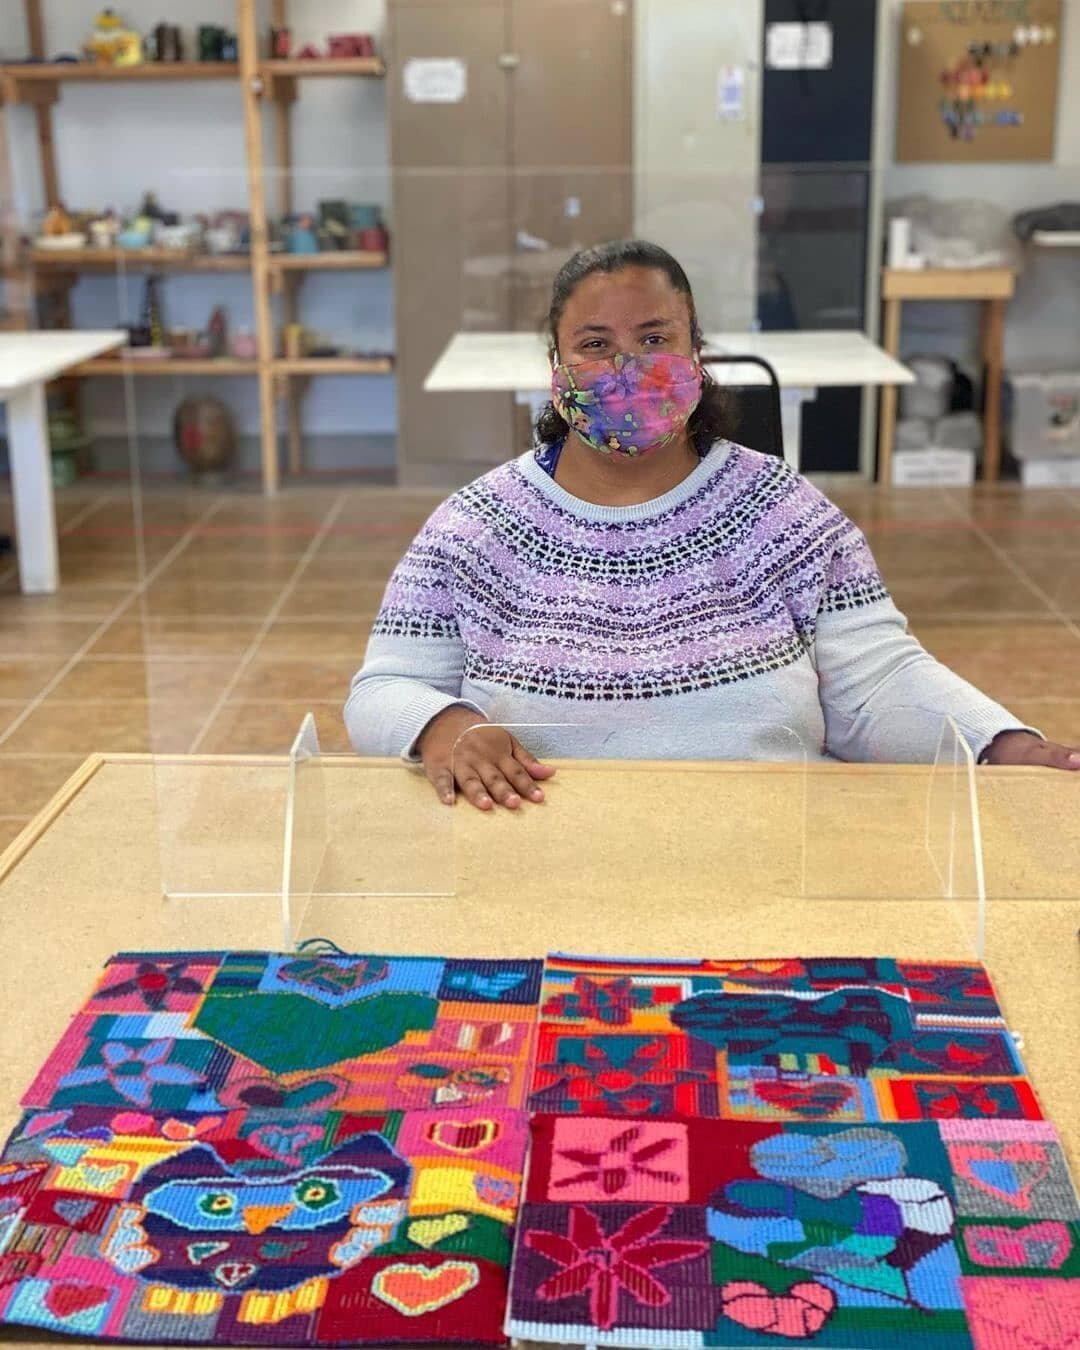 Christina Anderson has been working really hard to design these plastic canvas. She&rsquo;s going to sew them together to make several tote bags. We are loving the fun imagery and bright colors that she chose. Stay tuned for the finished project! 
.
